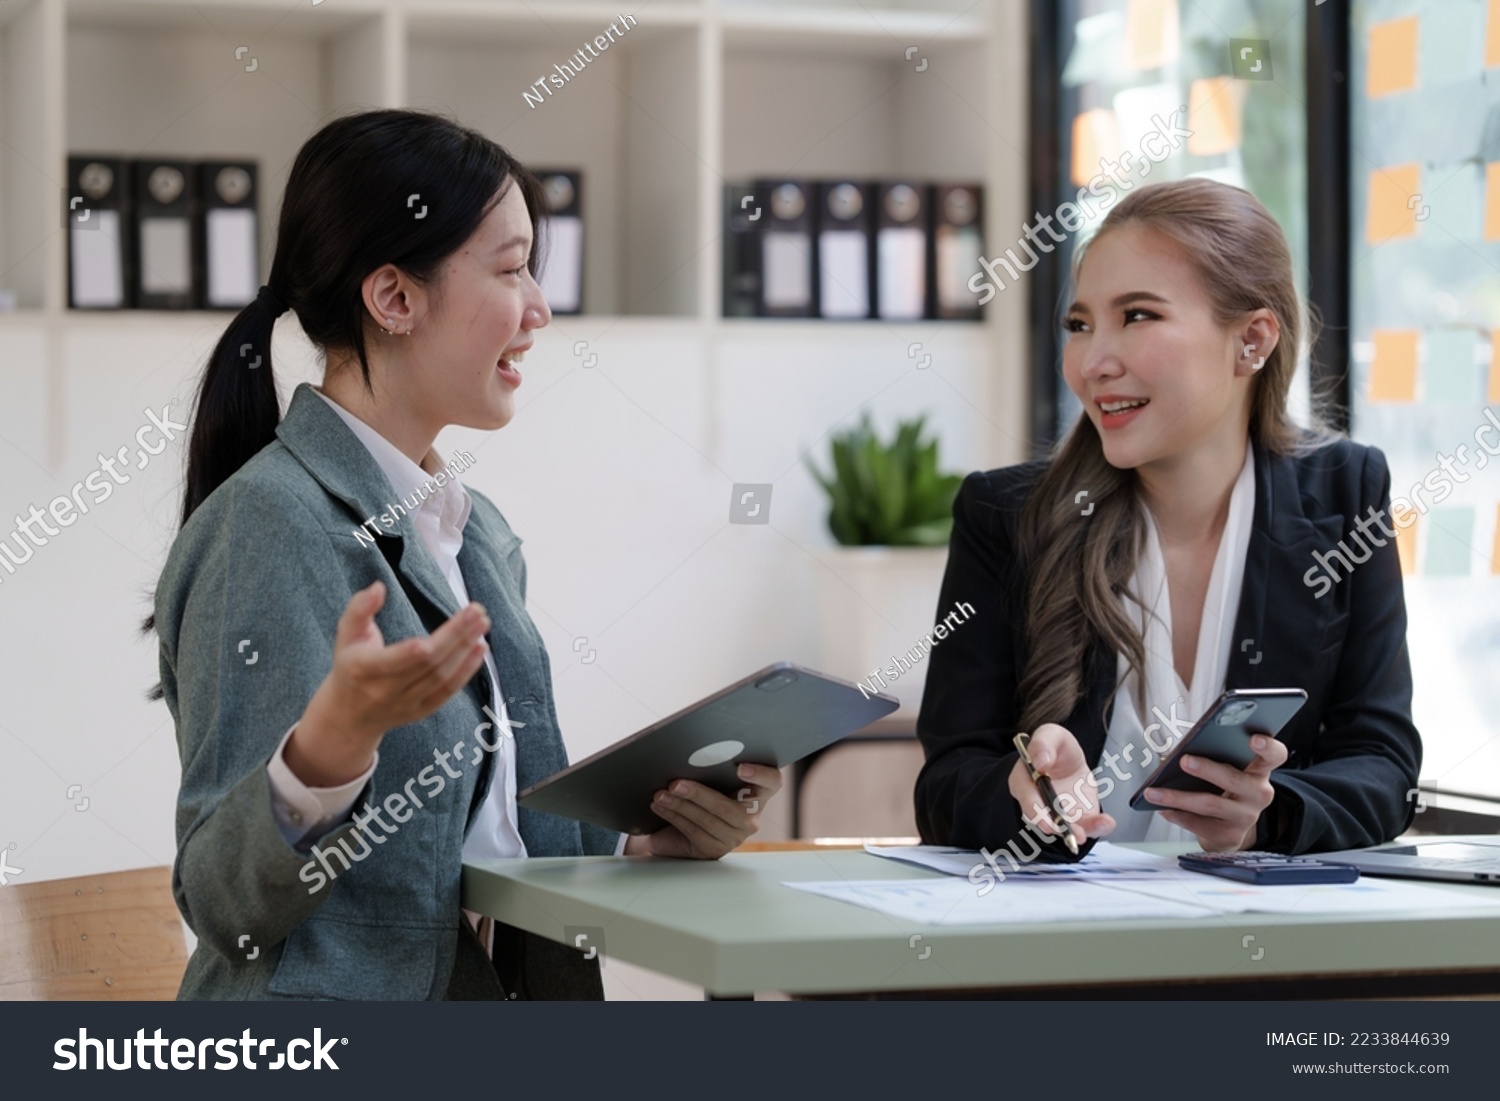 Female business worker with colleagues in Thailand working together at office desk, Female office worker business suit working with document file and paper work. #2233844639